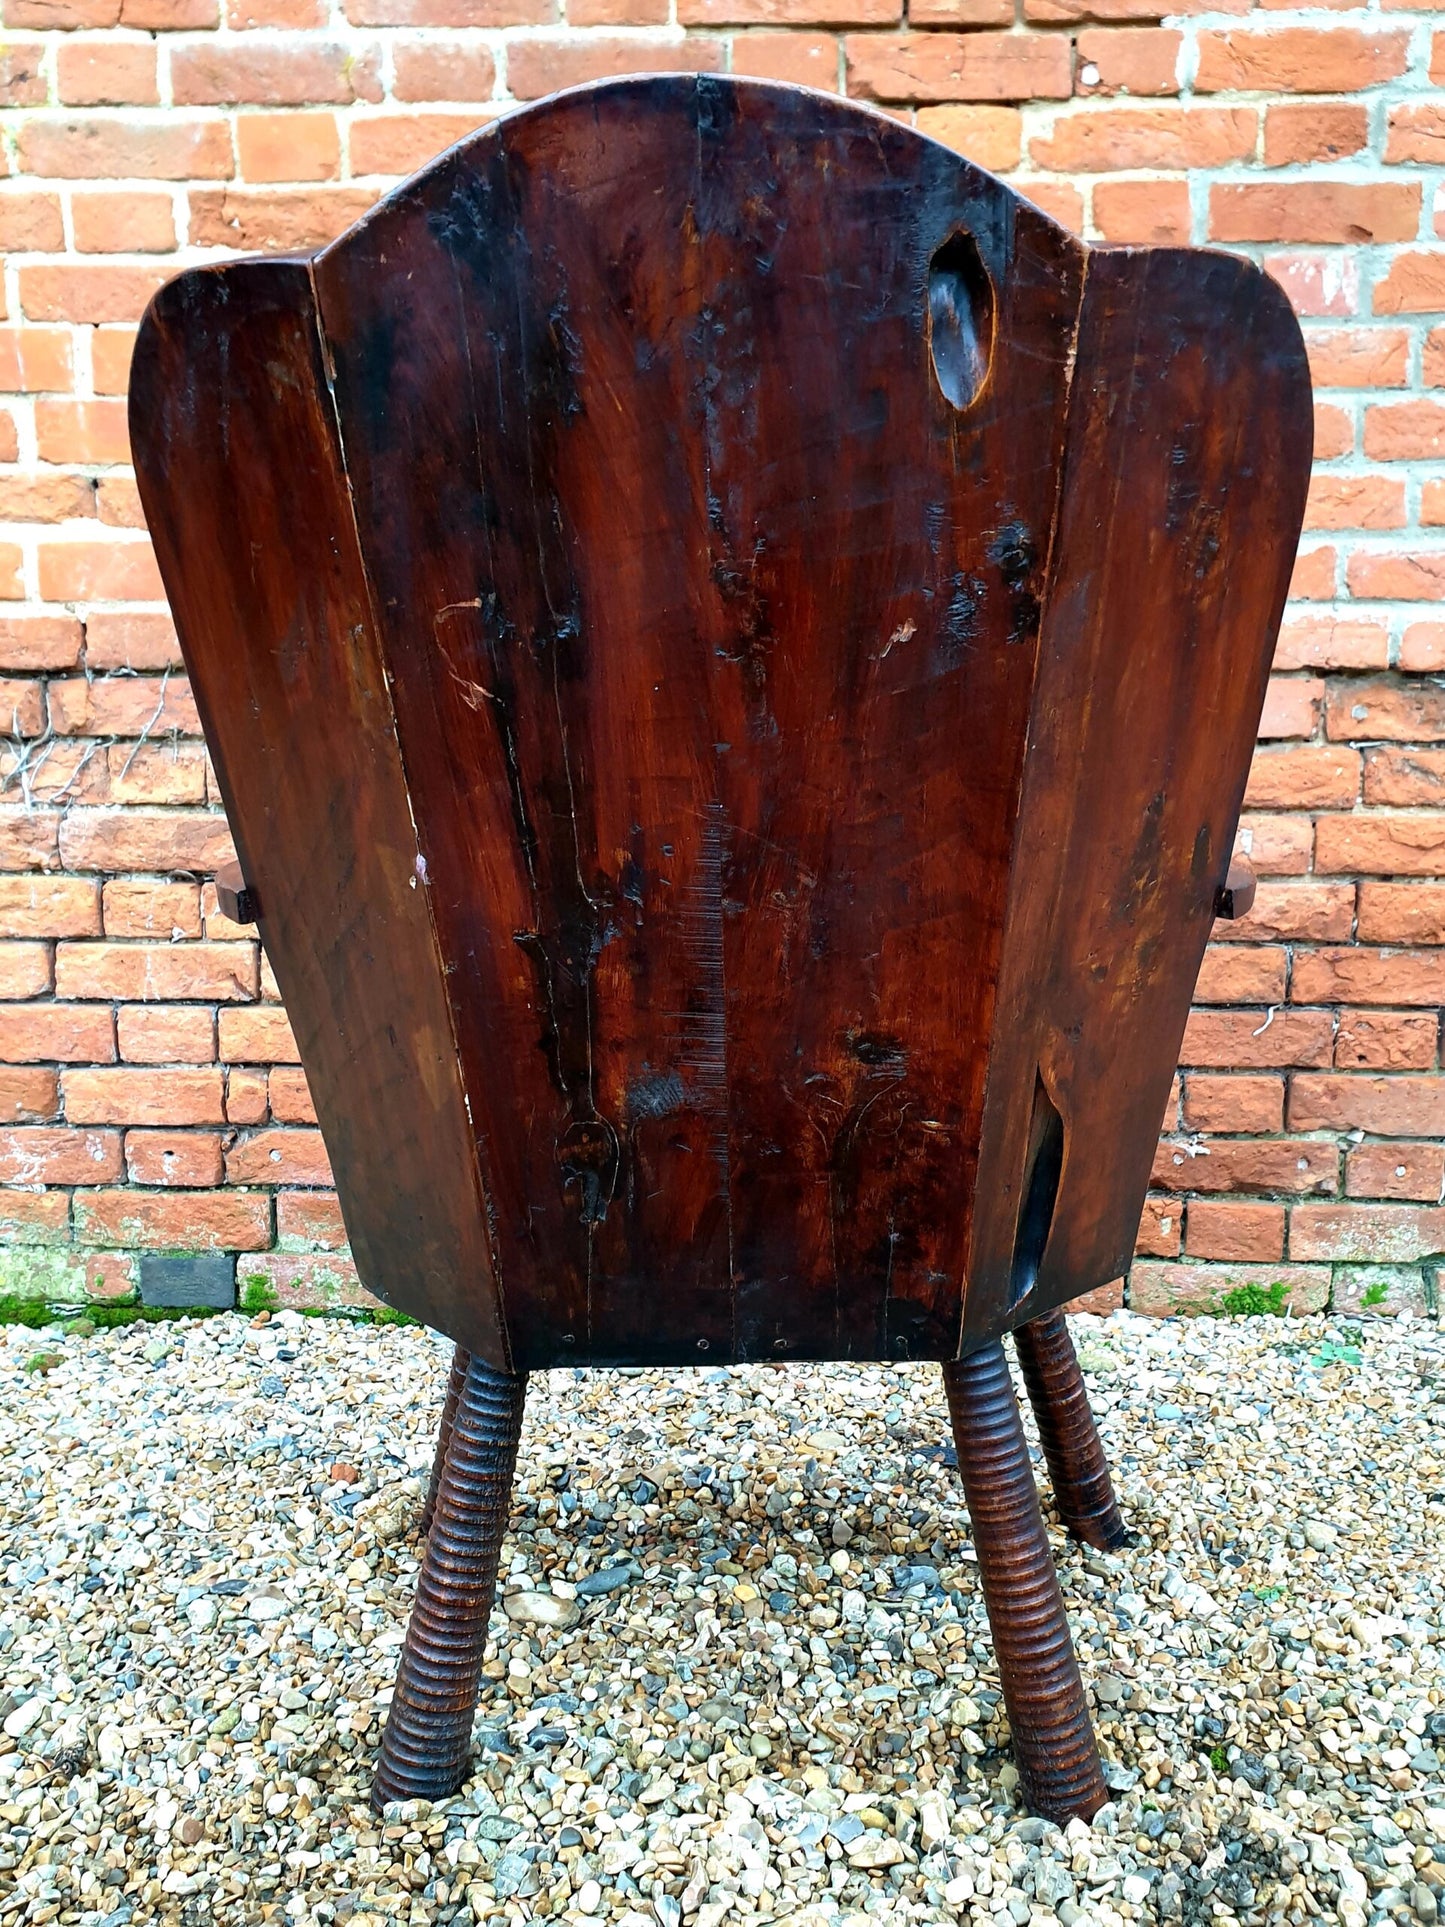 Late 18thC / Early 19thC Primitive English Antique Wing Back Armchair